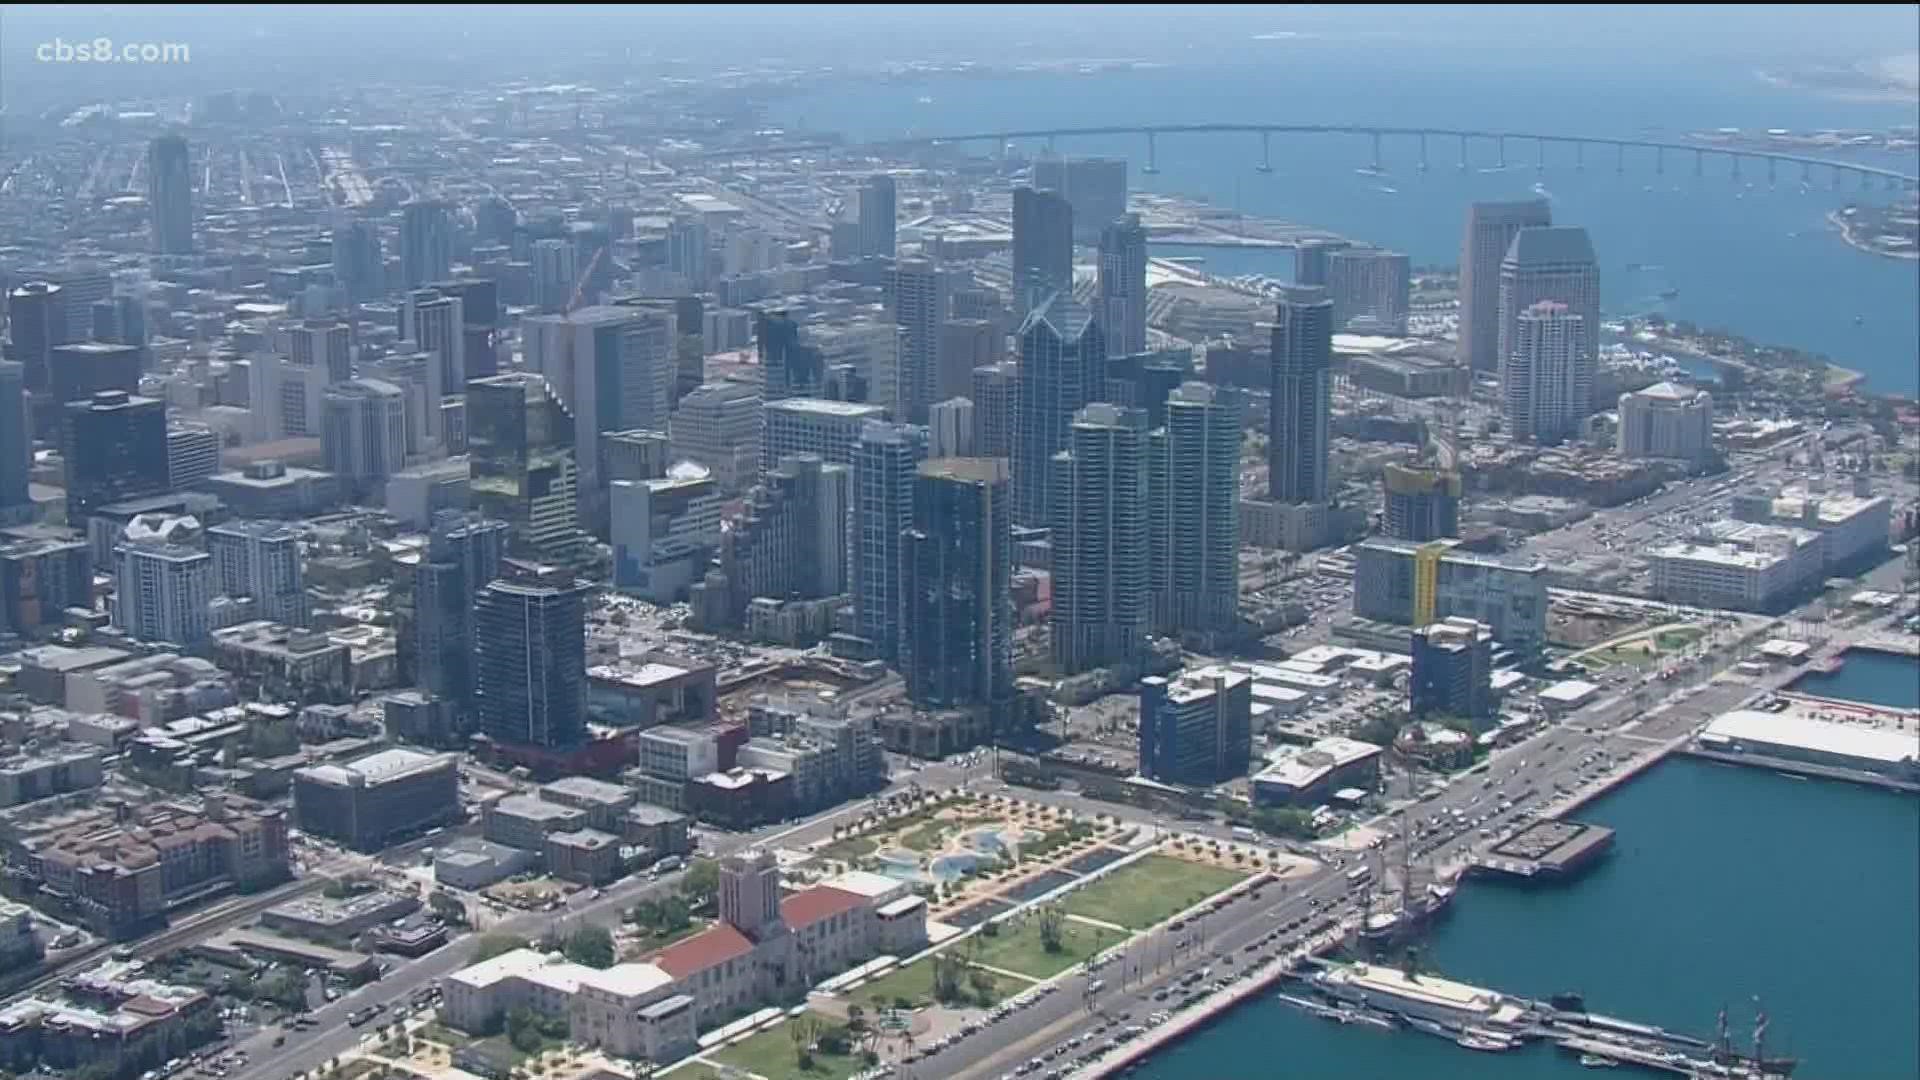 San Diego has grown by about 80,000 people in the last 10 years seeing a 6% growth.